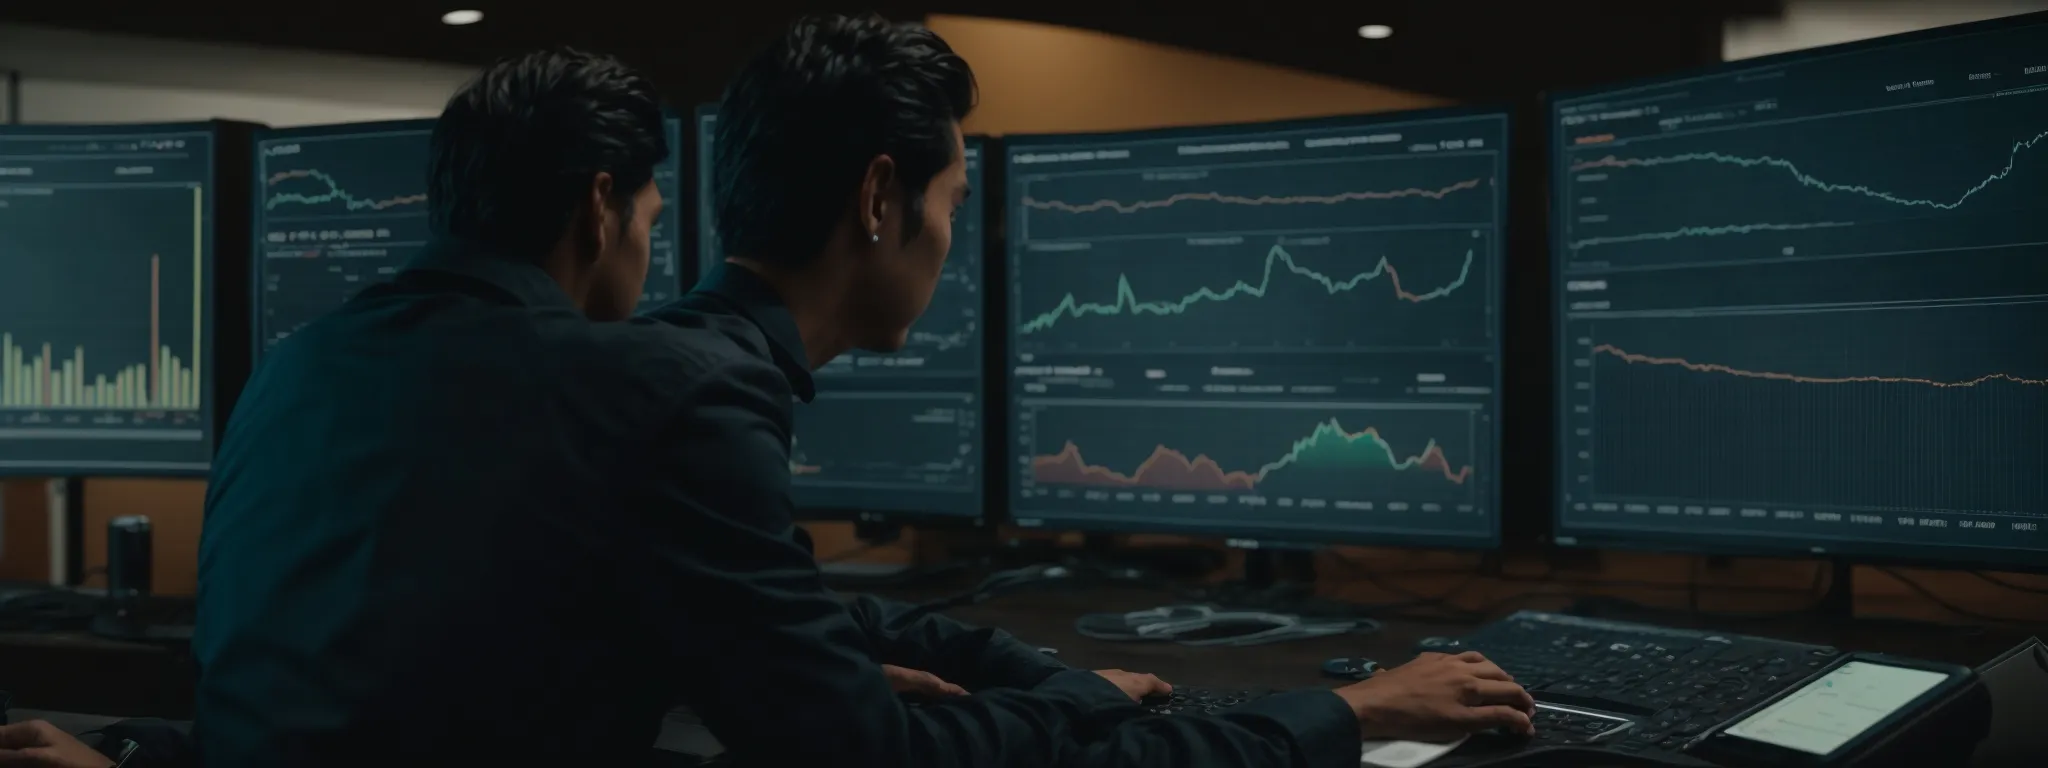 a person scrutinizing a complex dashboard displaying various seo metrics and graphs on a large monitor.